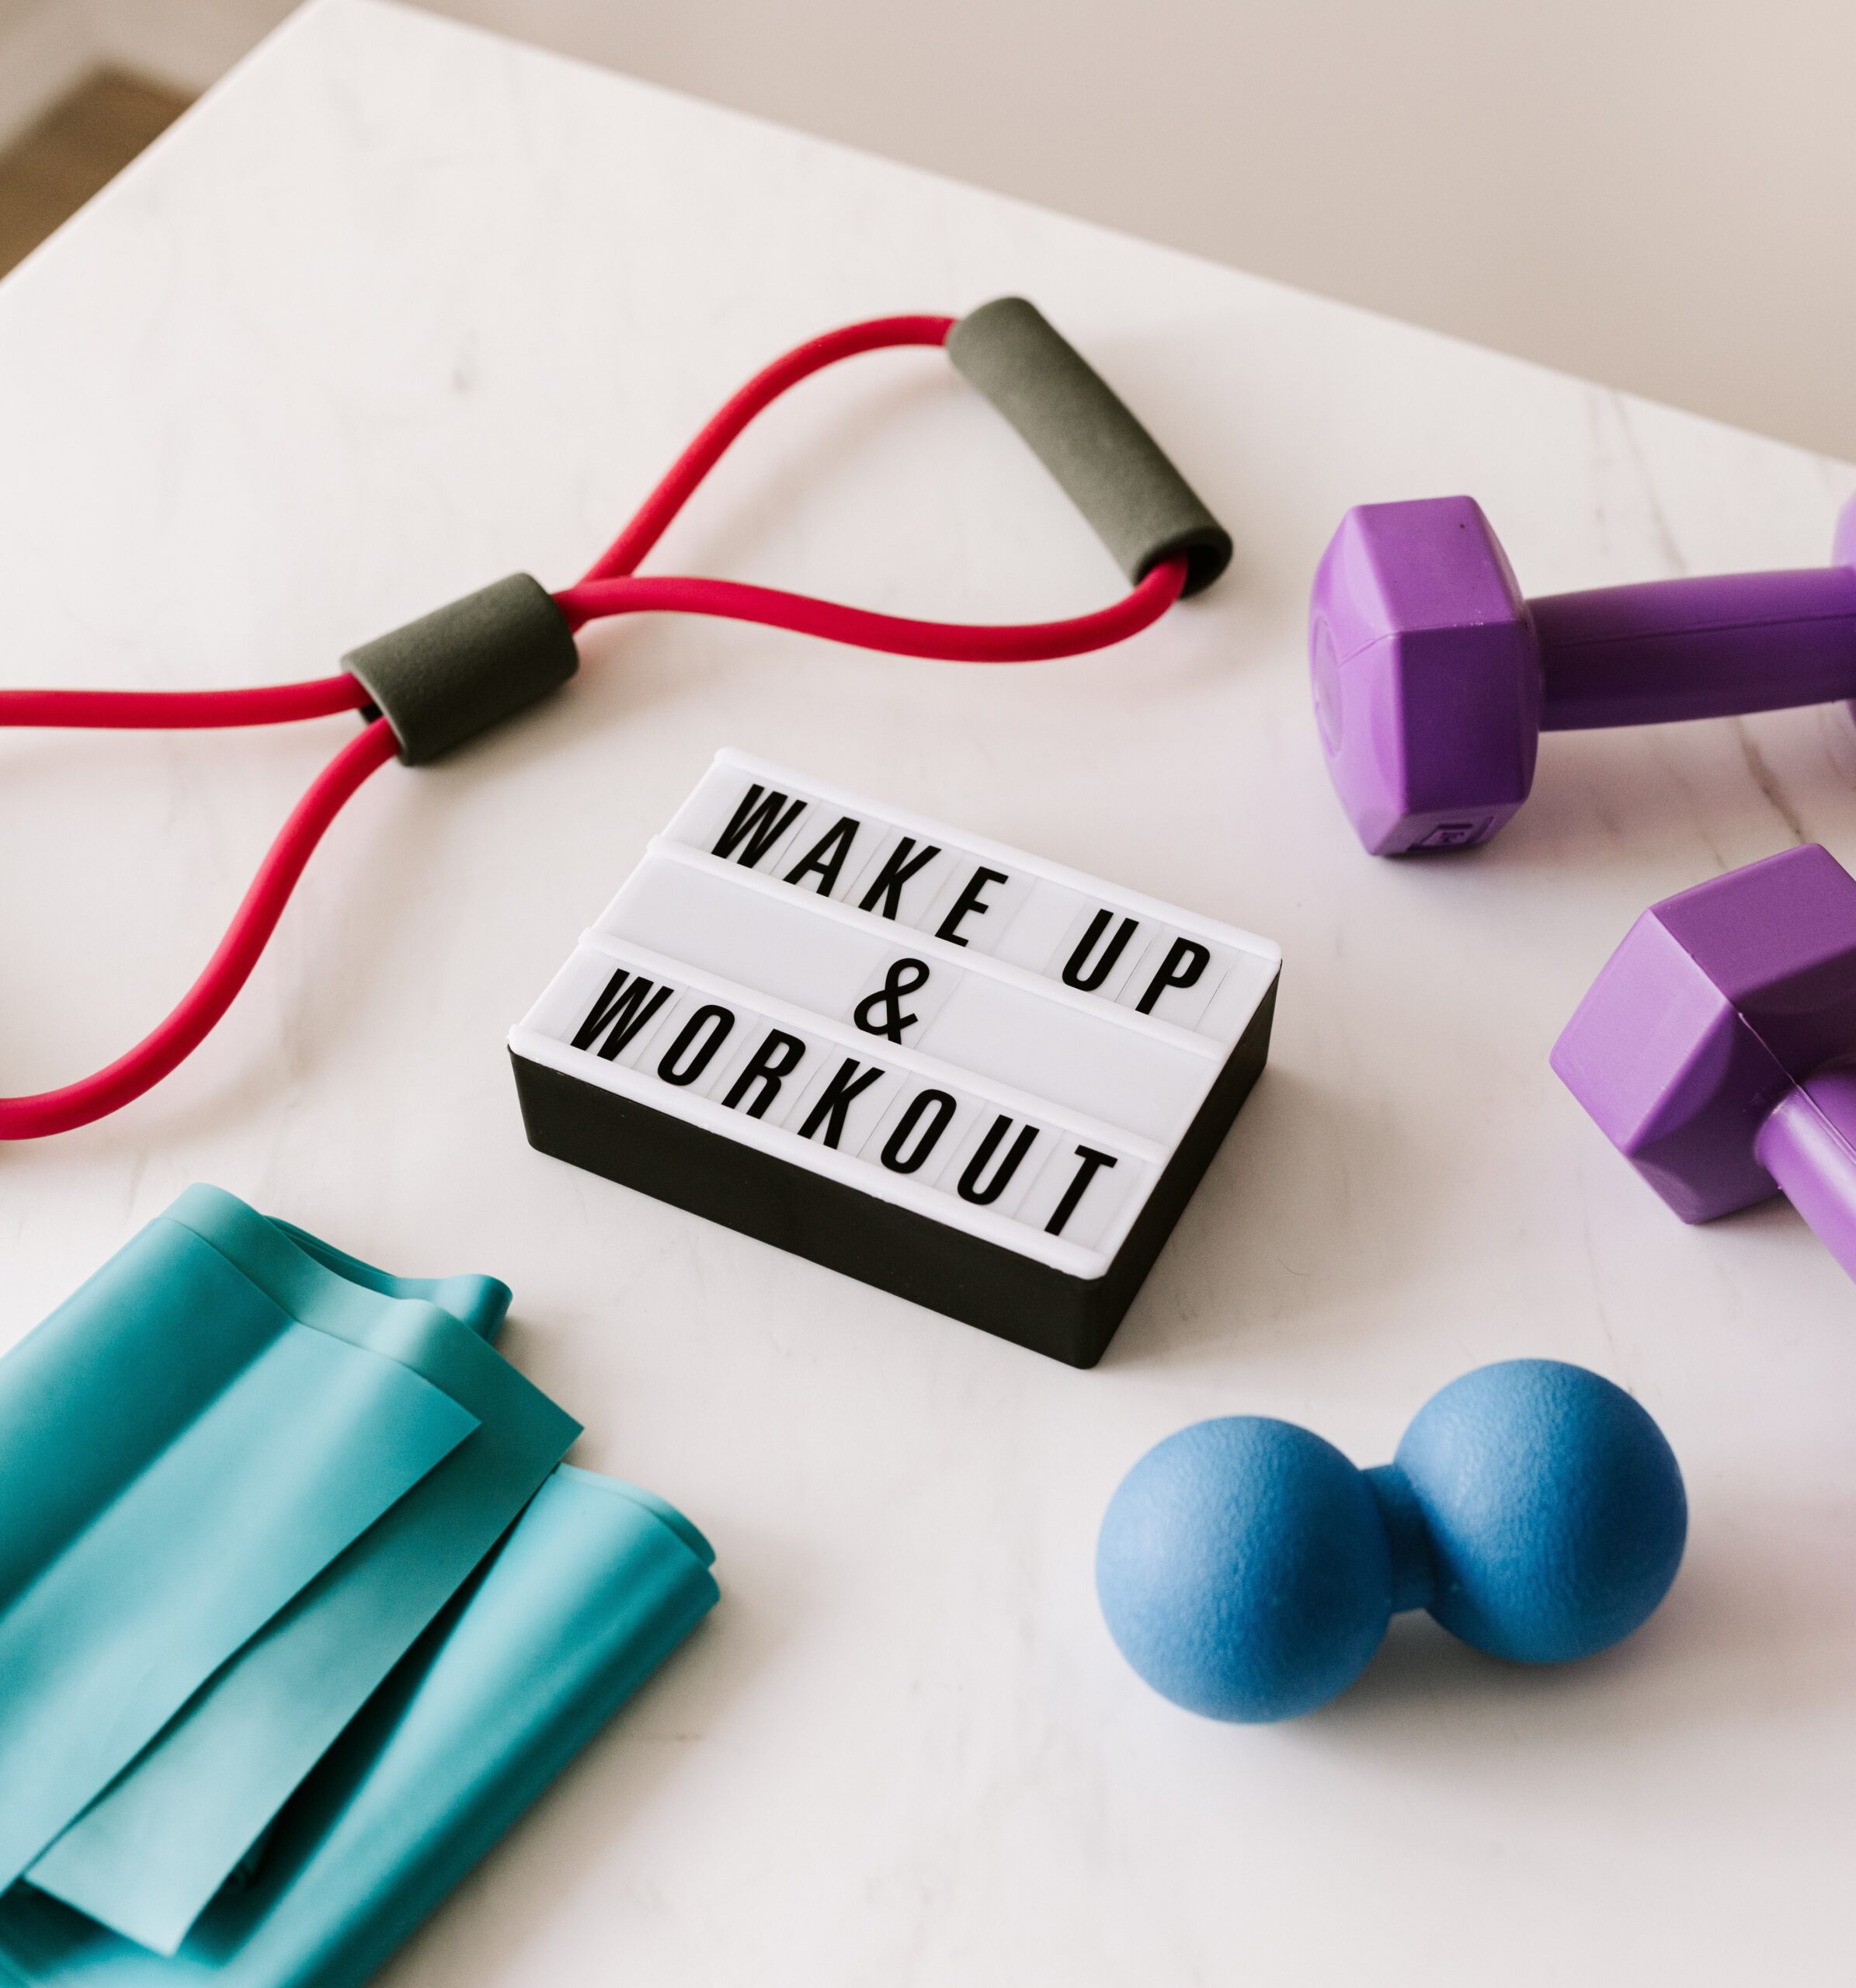 “How to start a fitness routine as a beginner”